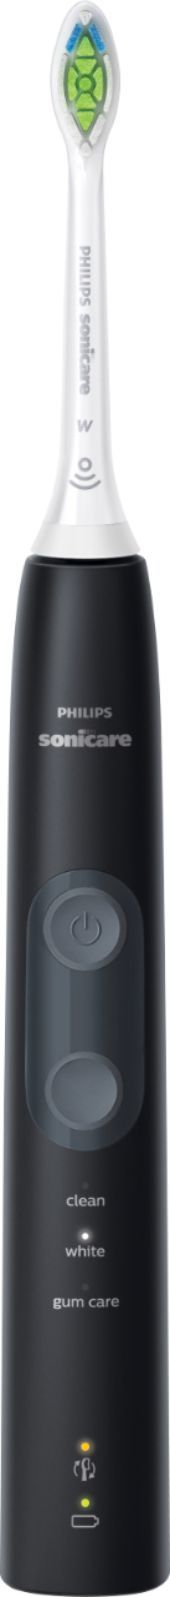 Philips Sonicare ProtectiveClean 5100 Rechargeable Toothbrush Black HX6850/60 - Best Buy | Best Buy U.S.